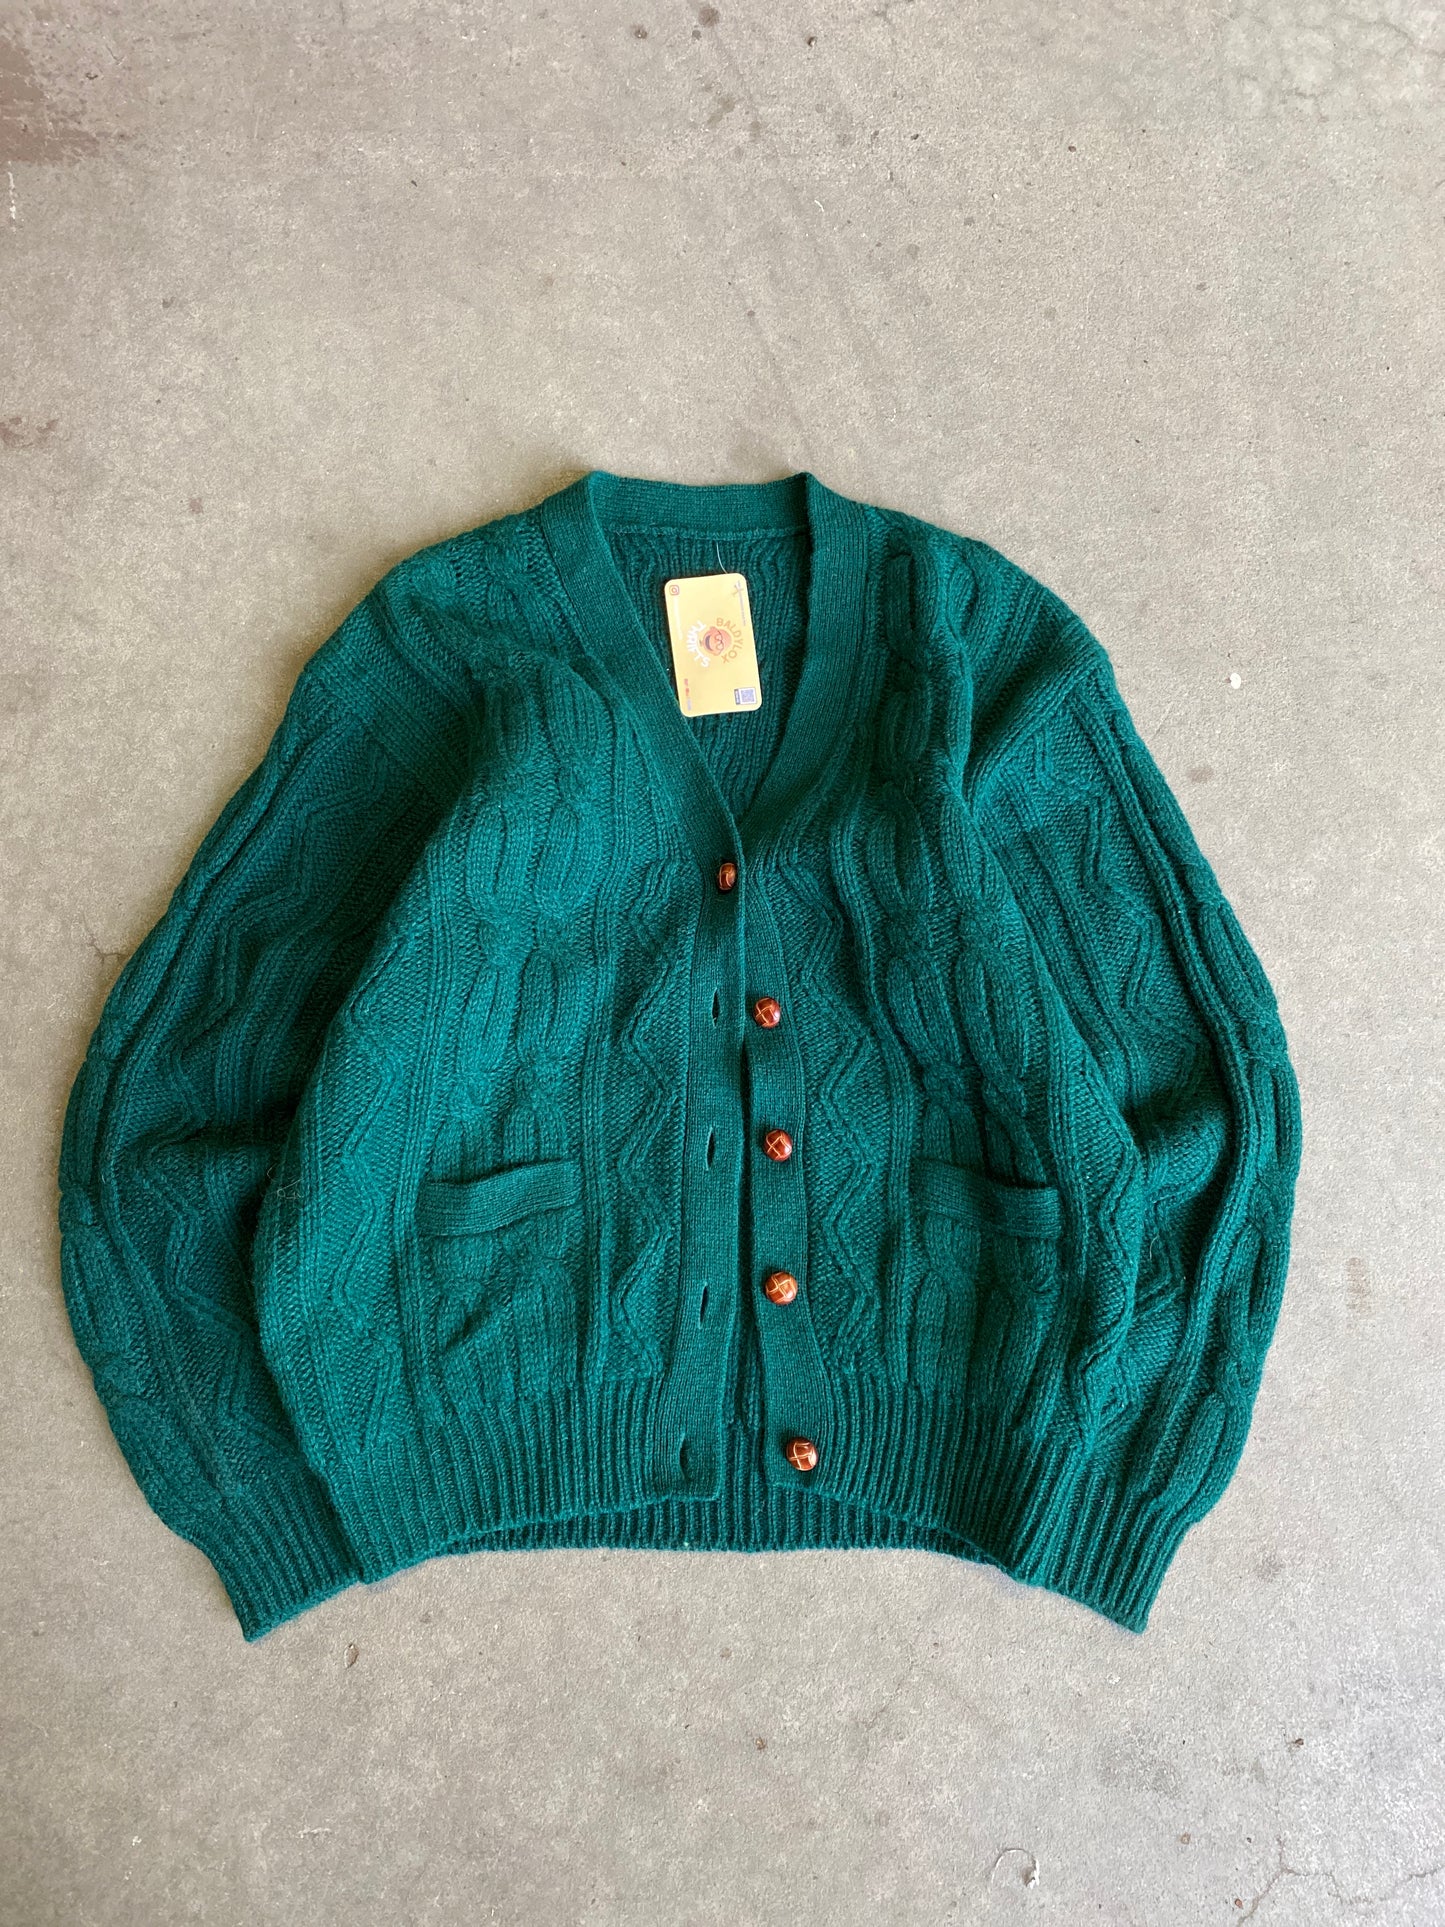 (M) Vintage Forest Green Cable Knit Cardigan